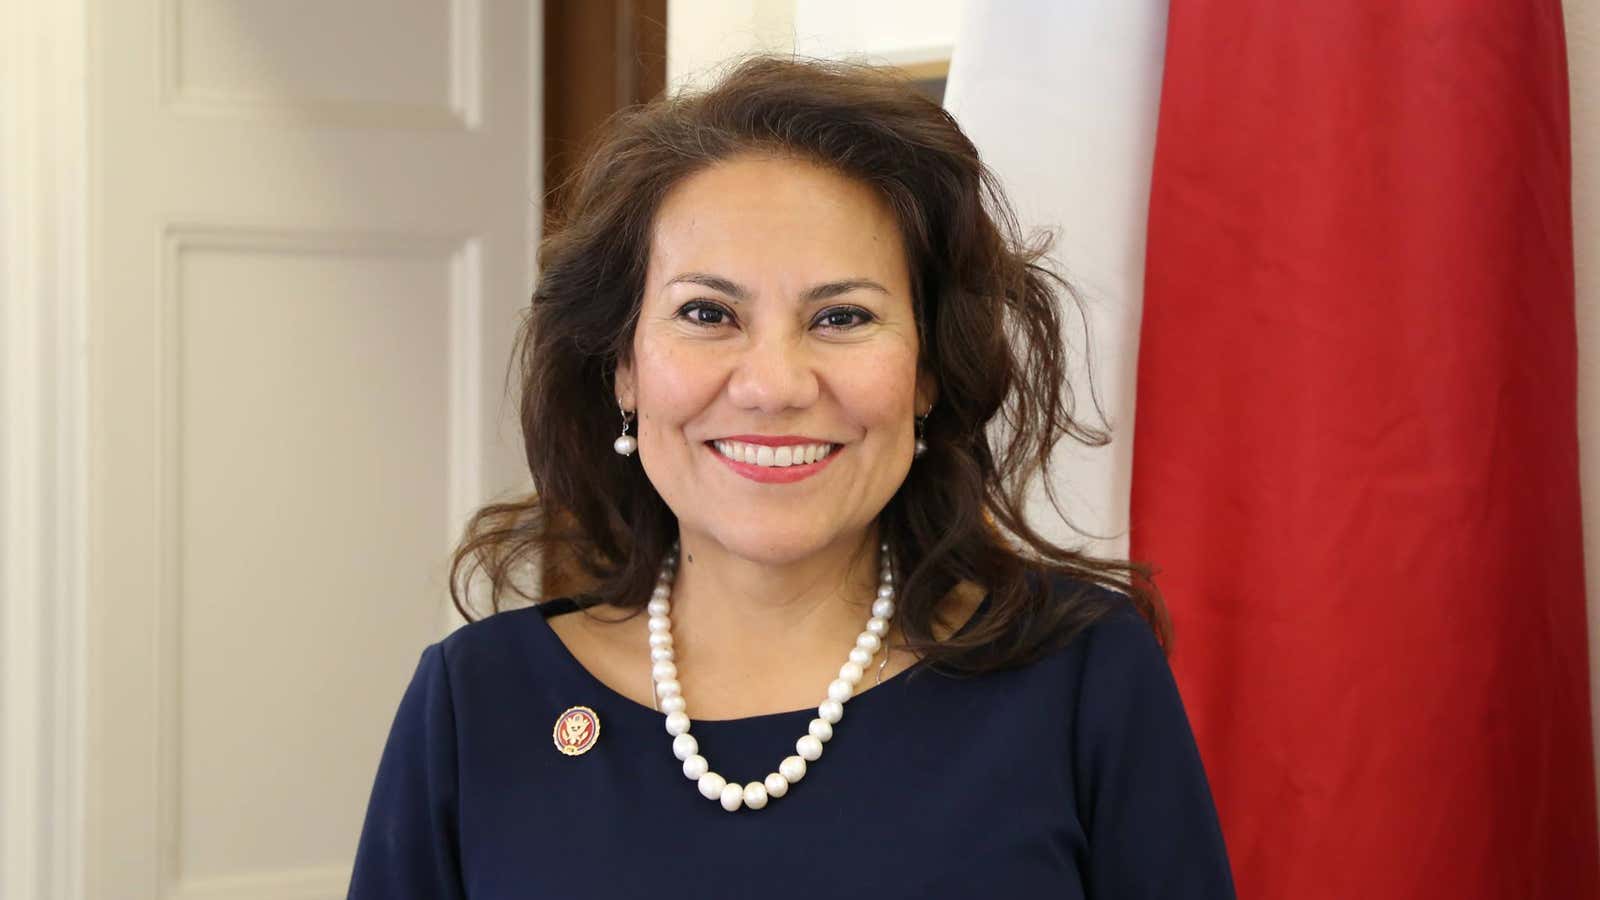 As co-chair of the Immigration Taskforce, Rep. Veronica Escobar knows the value of listening to many different voices